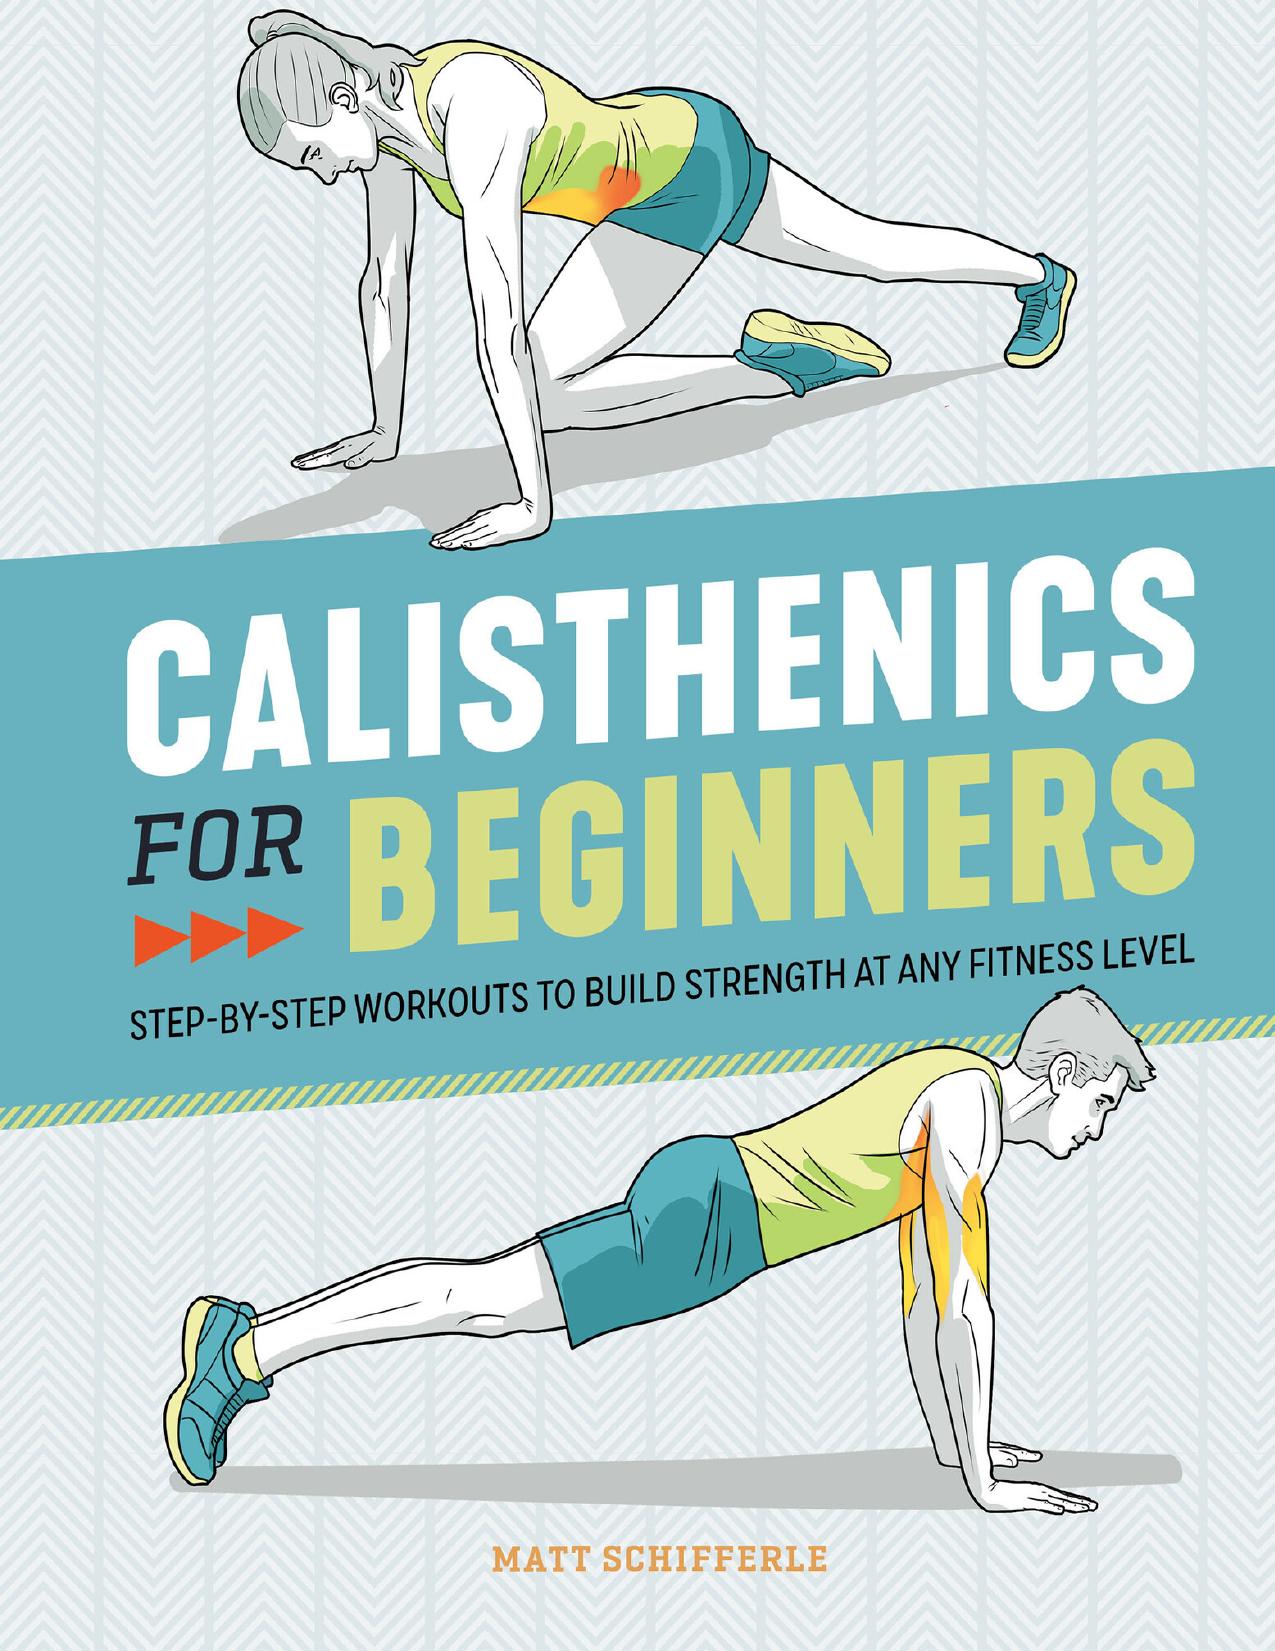 Calisthenics for Beginners: Step-by-Step Workouts to Build Strength at Any Fitness Level by Schifferle Matt